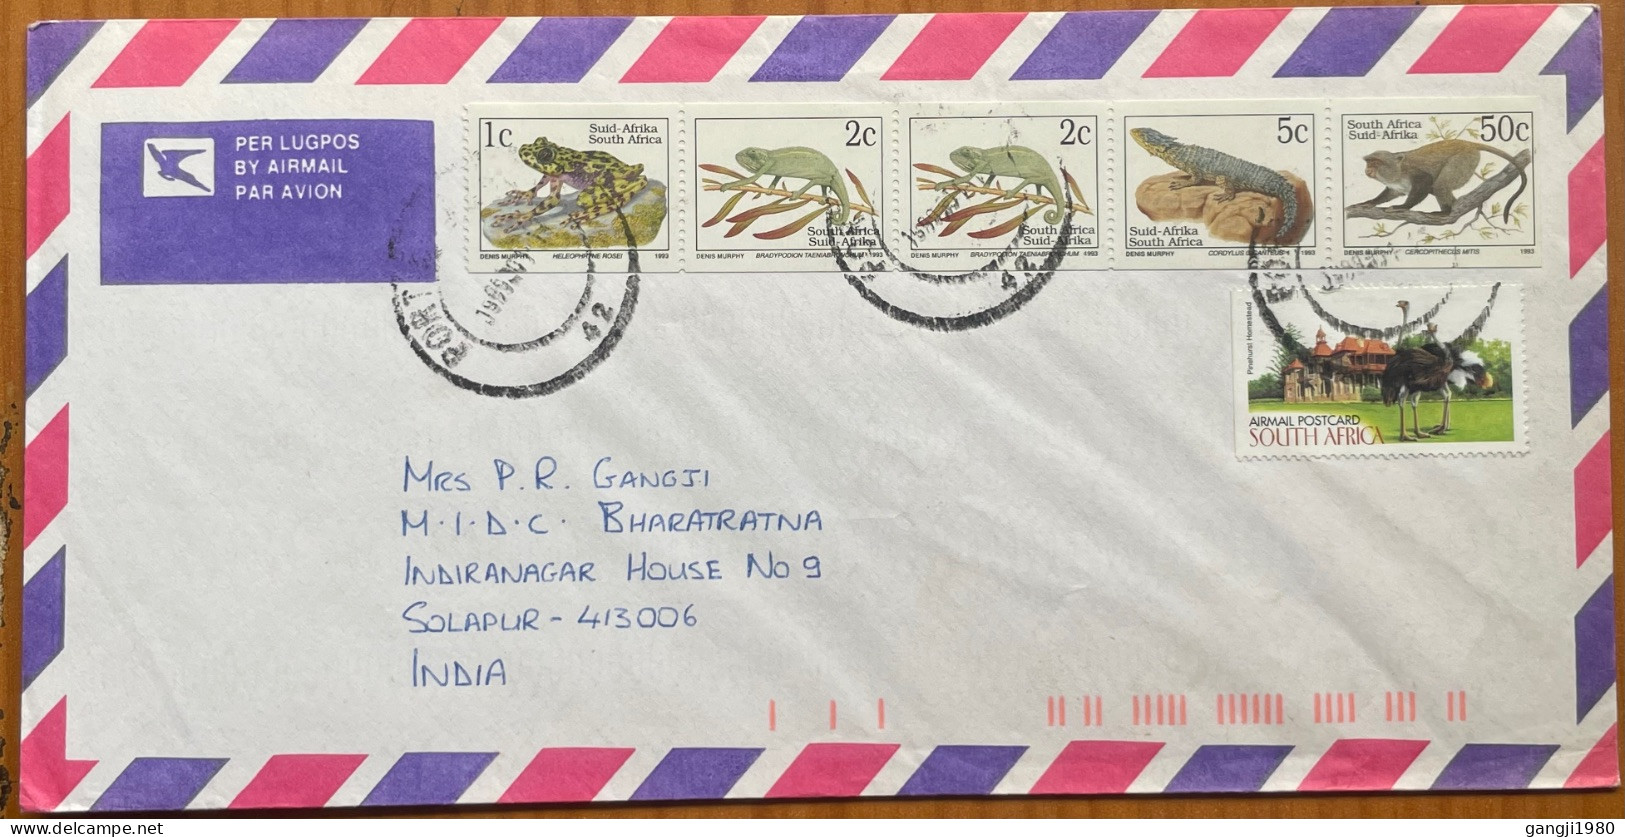 SOUTH AFRICA 1993, COVER USED TO INDIA, BOOKLET PANE, REPTILE, MONKEY, ANIMAL, BIRD, BUILDING, 6 STAMP, PORT ELIZABETH - Covers & Documents